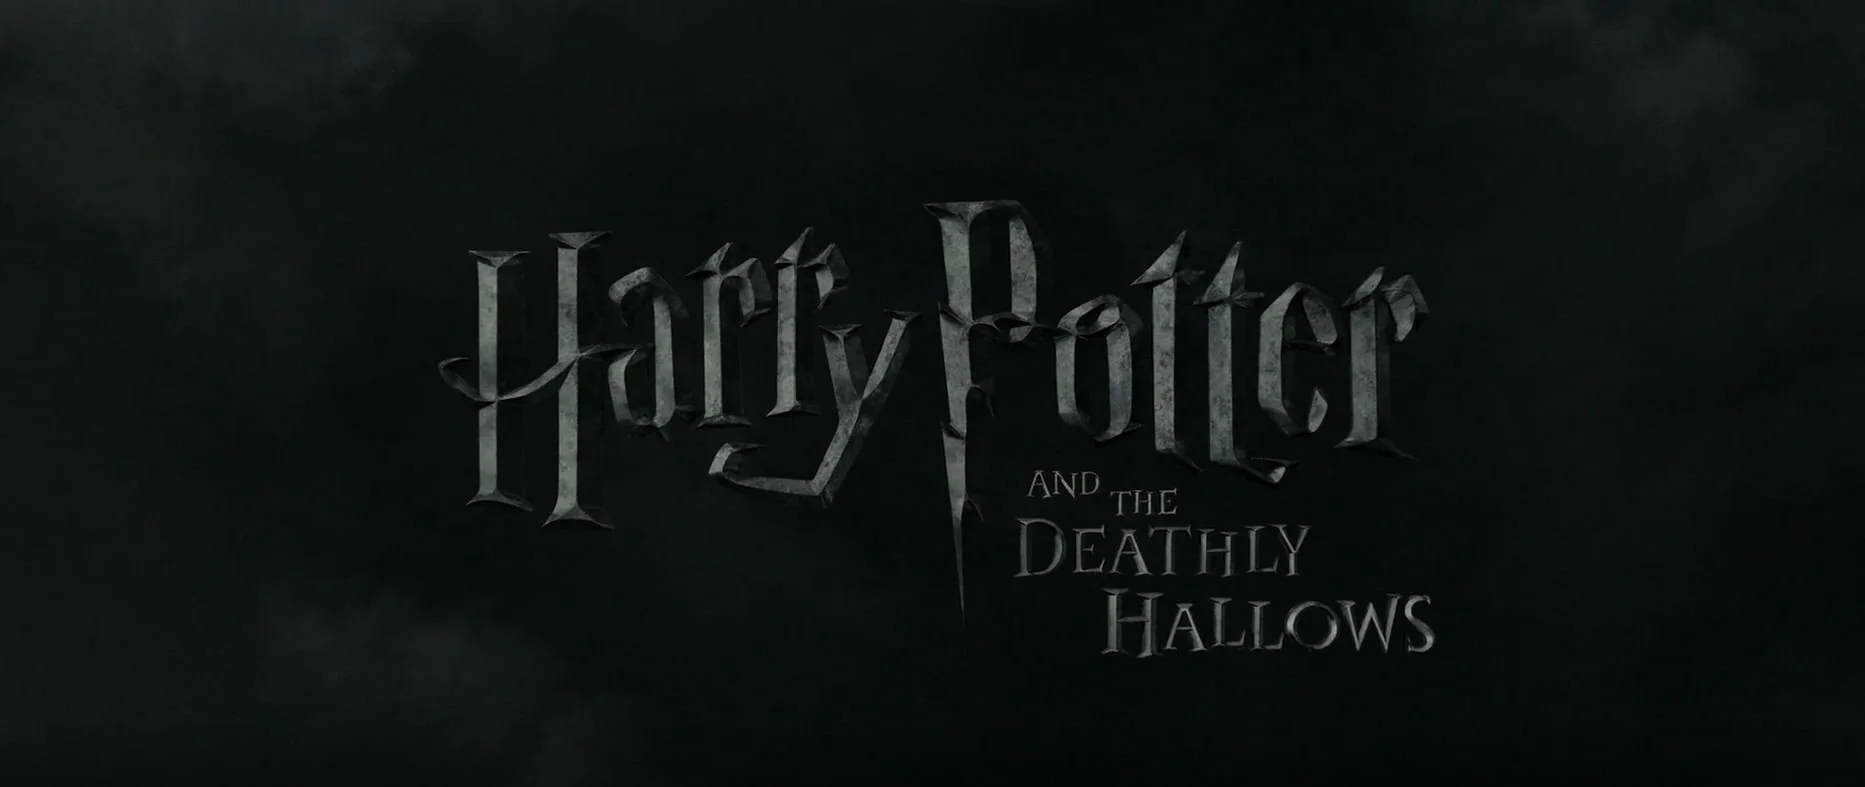 harry potter and the deathly hallows, parts 1 and 2 will they make multiple movies